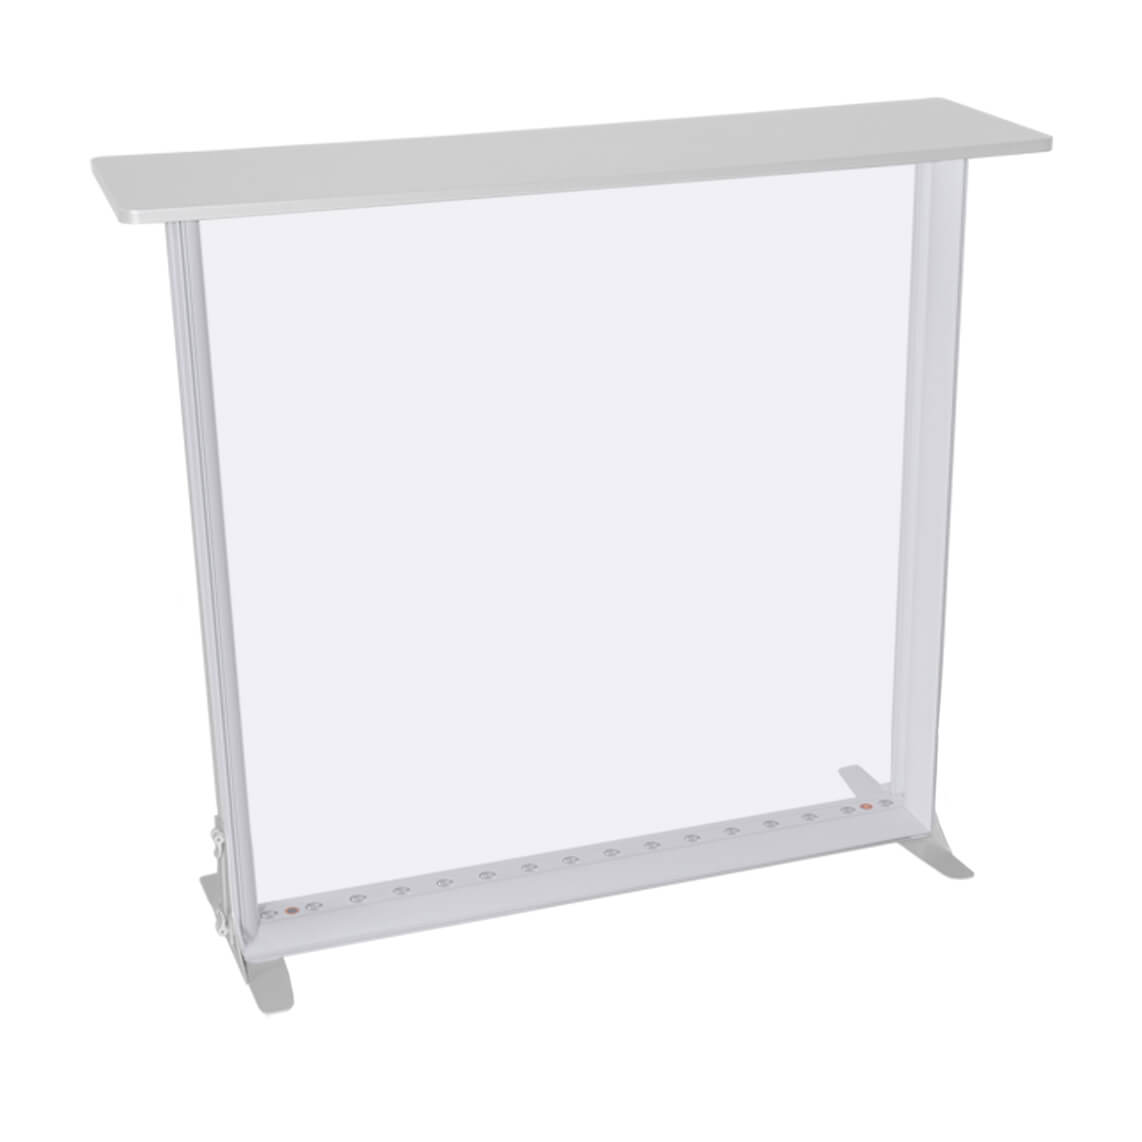 Mobile LED exhibition counter 120 mm white different table tops